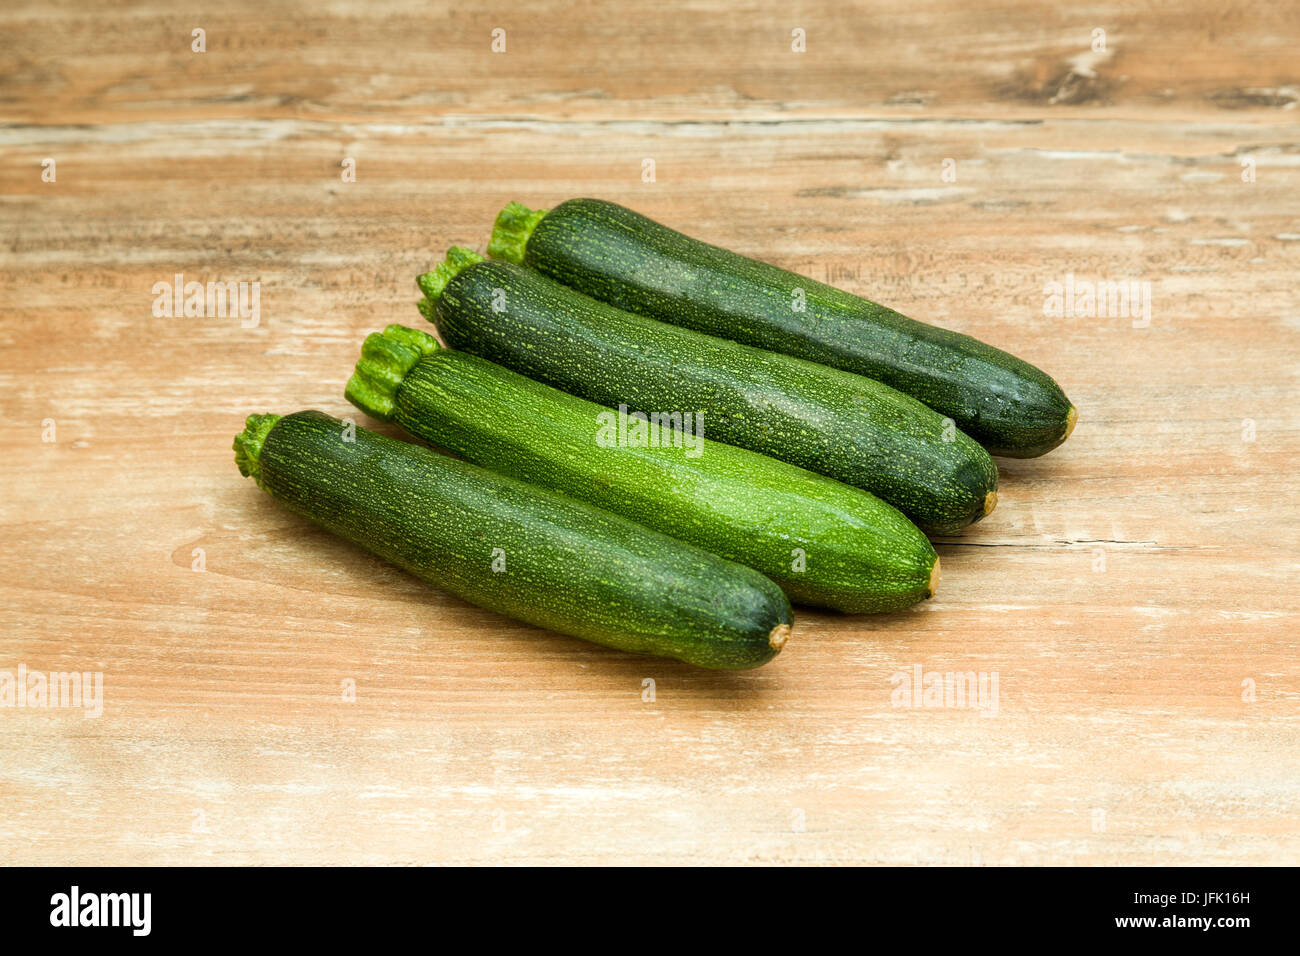 raw zucchini on wooden table Stock Photo